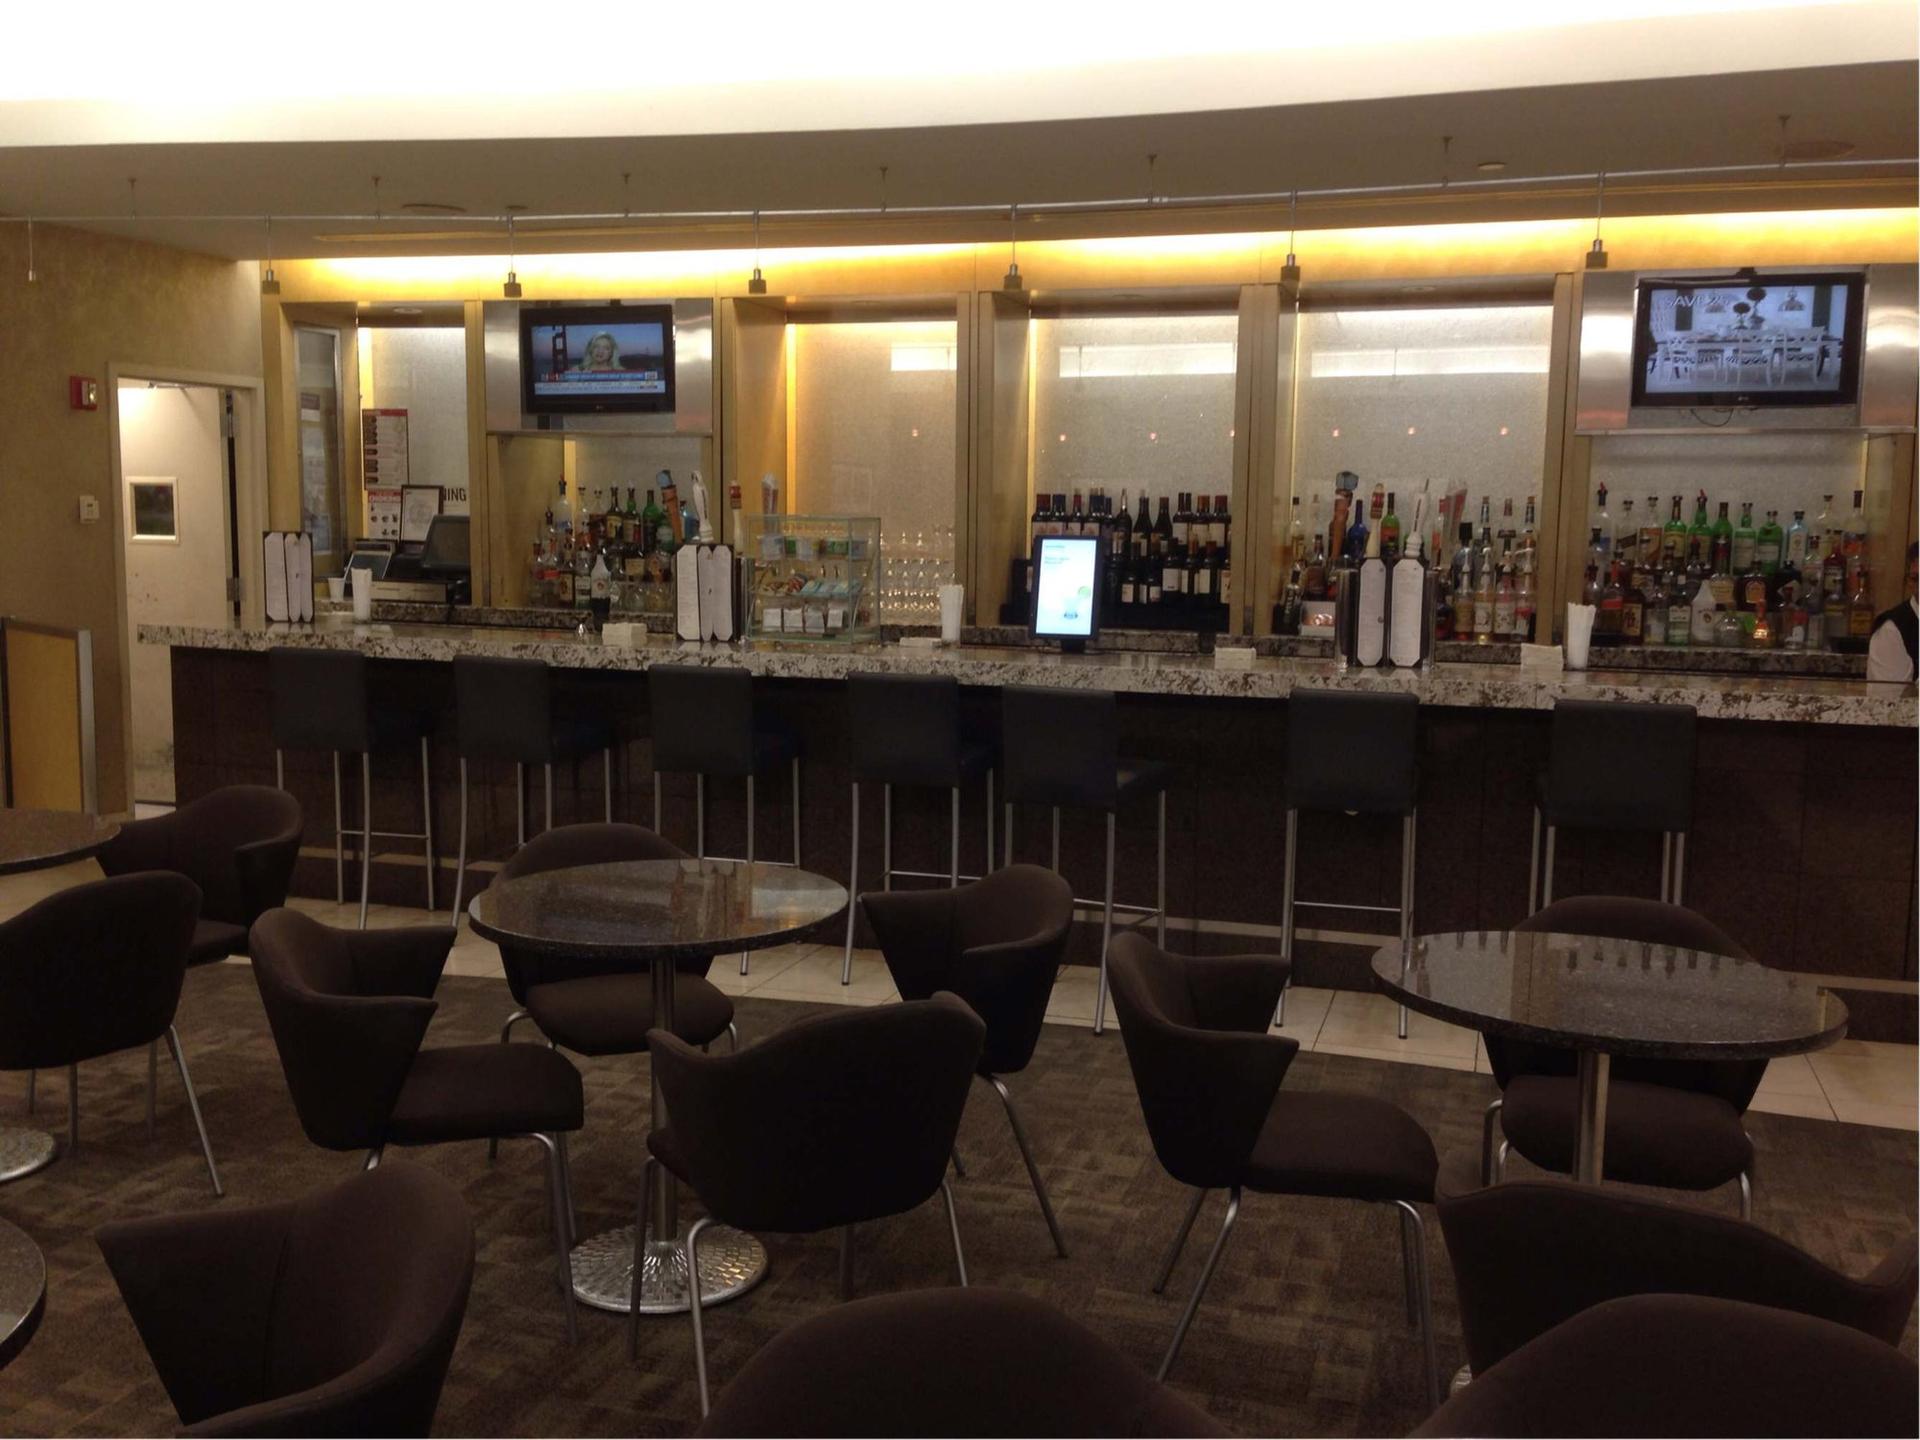 American Airlines Admirals Club image 2 of 25